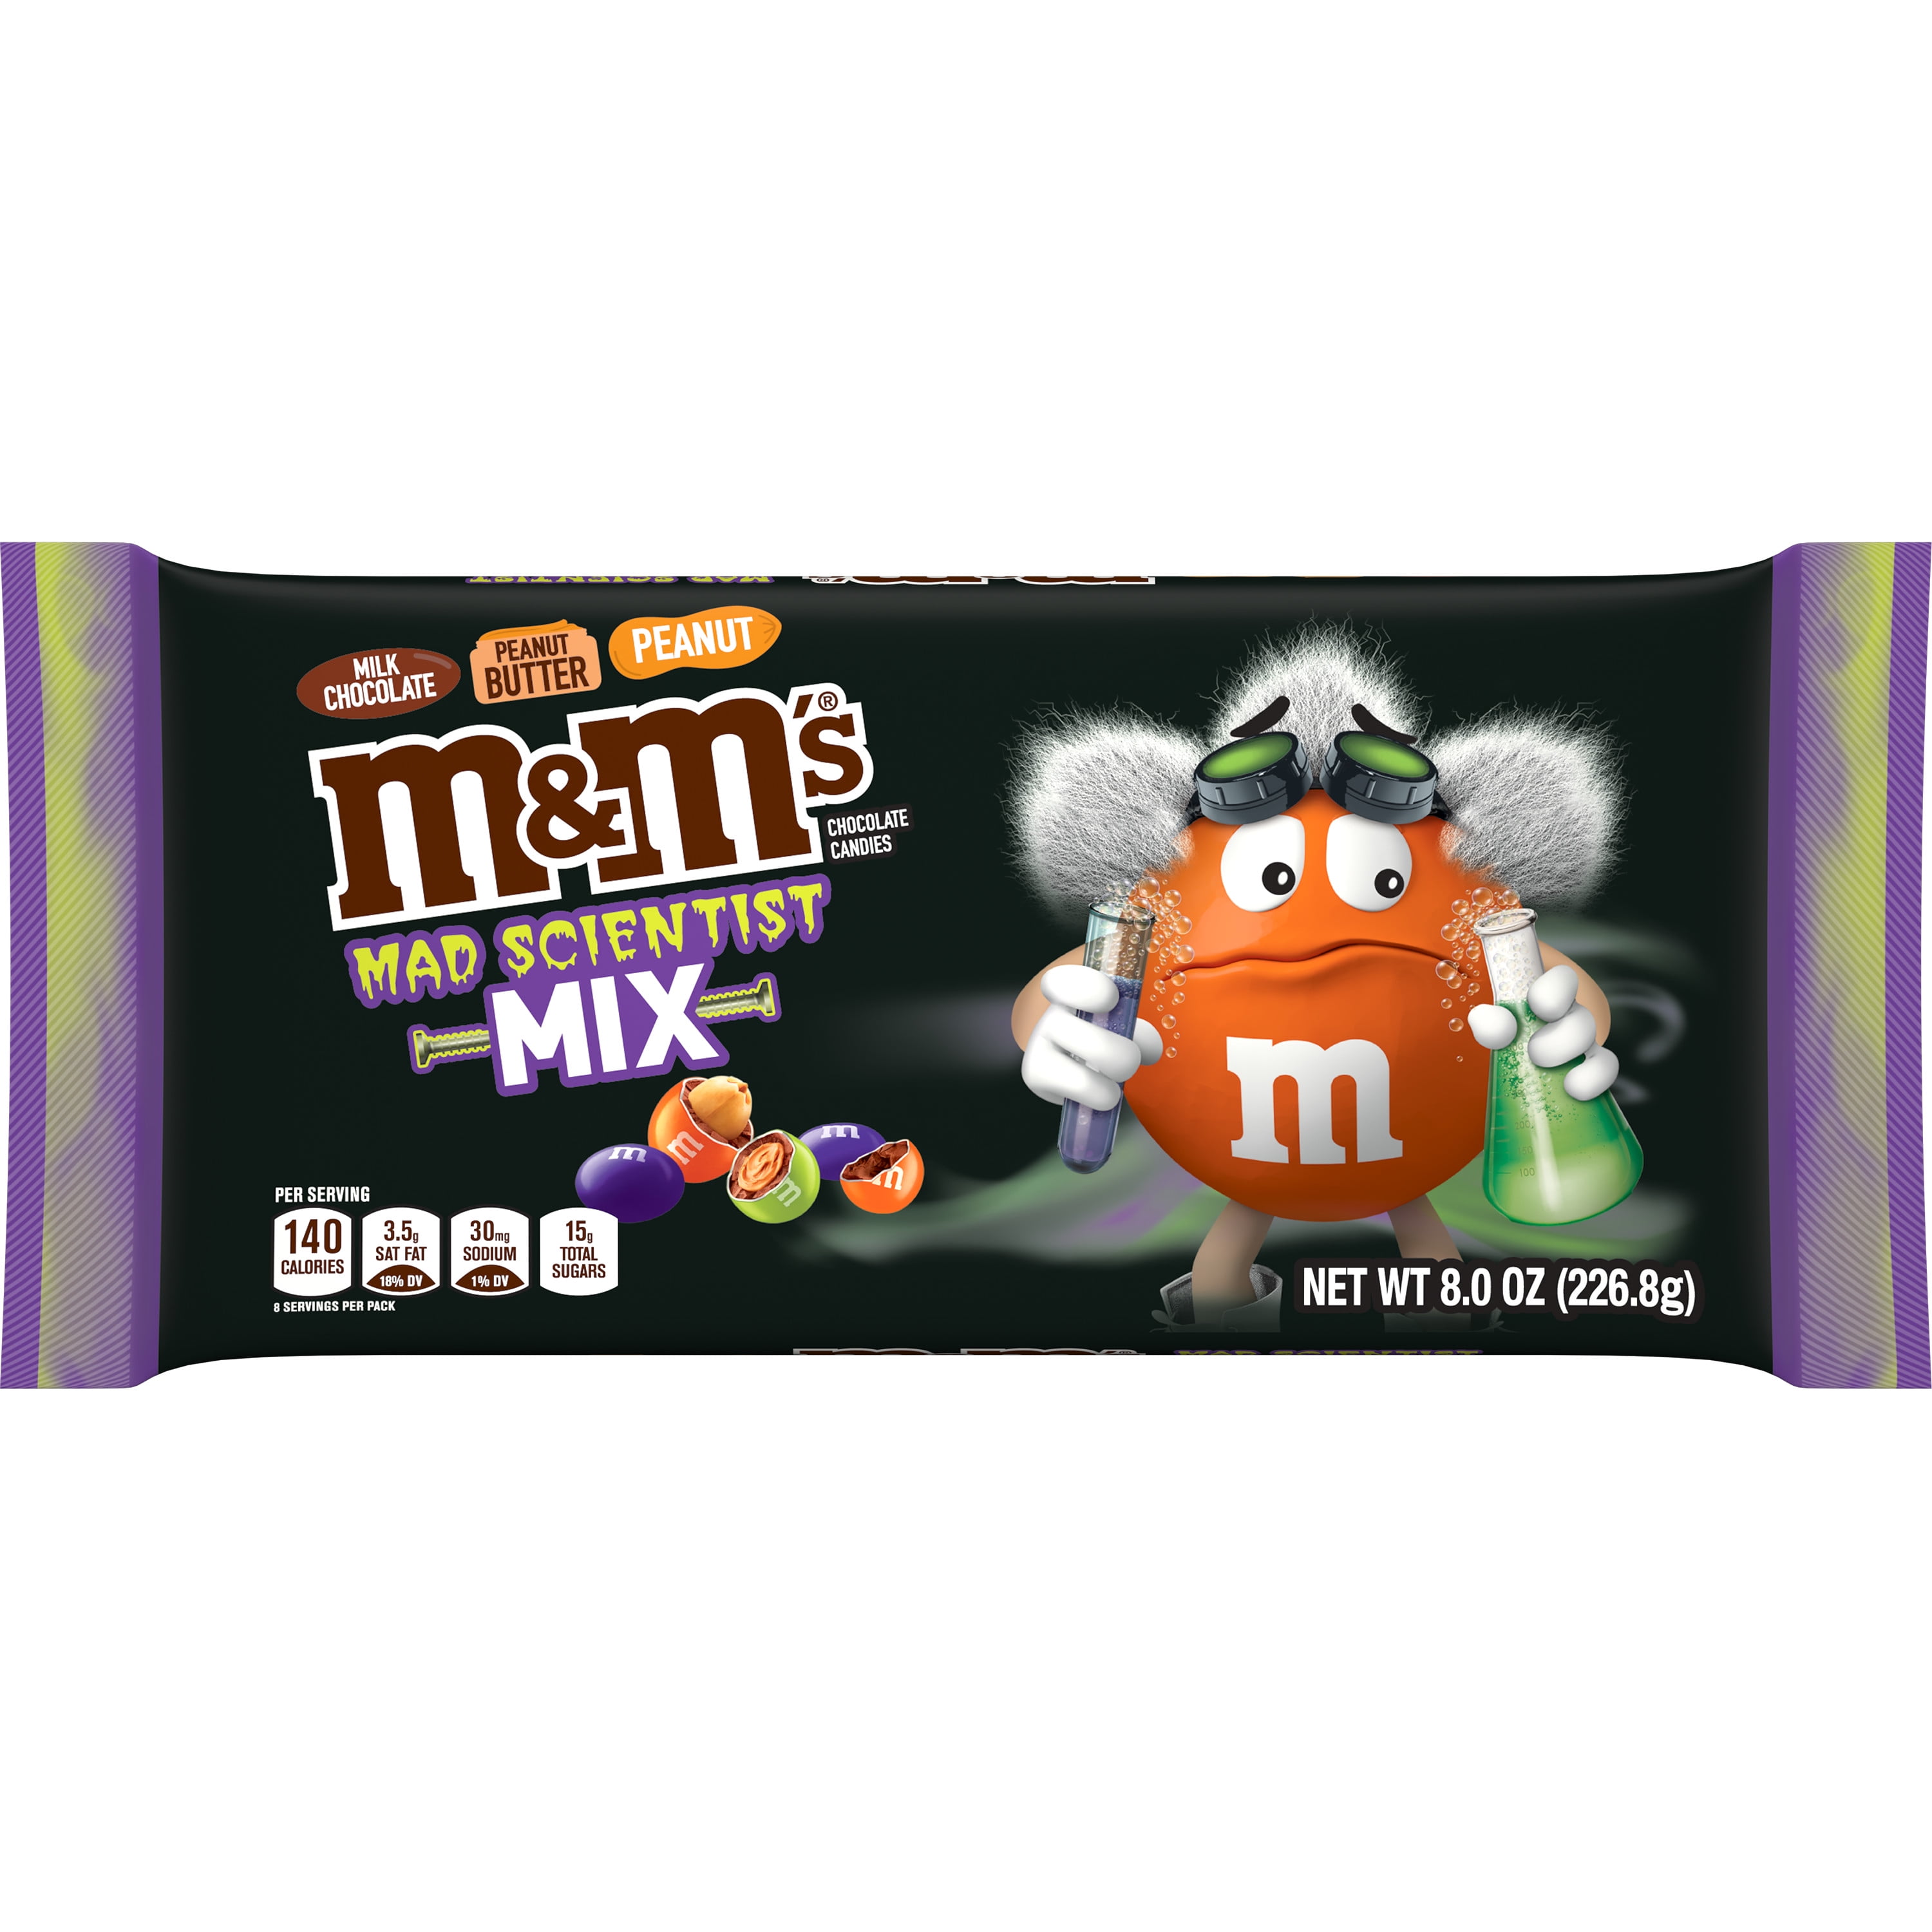  M&M'S Peanut Butter Ghoul's Mix Chocolate Halloween